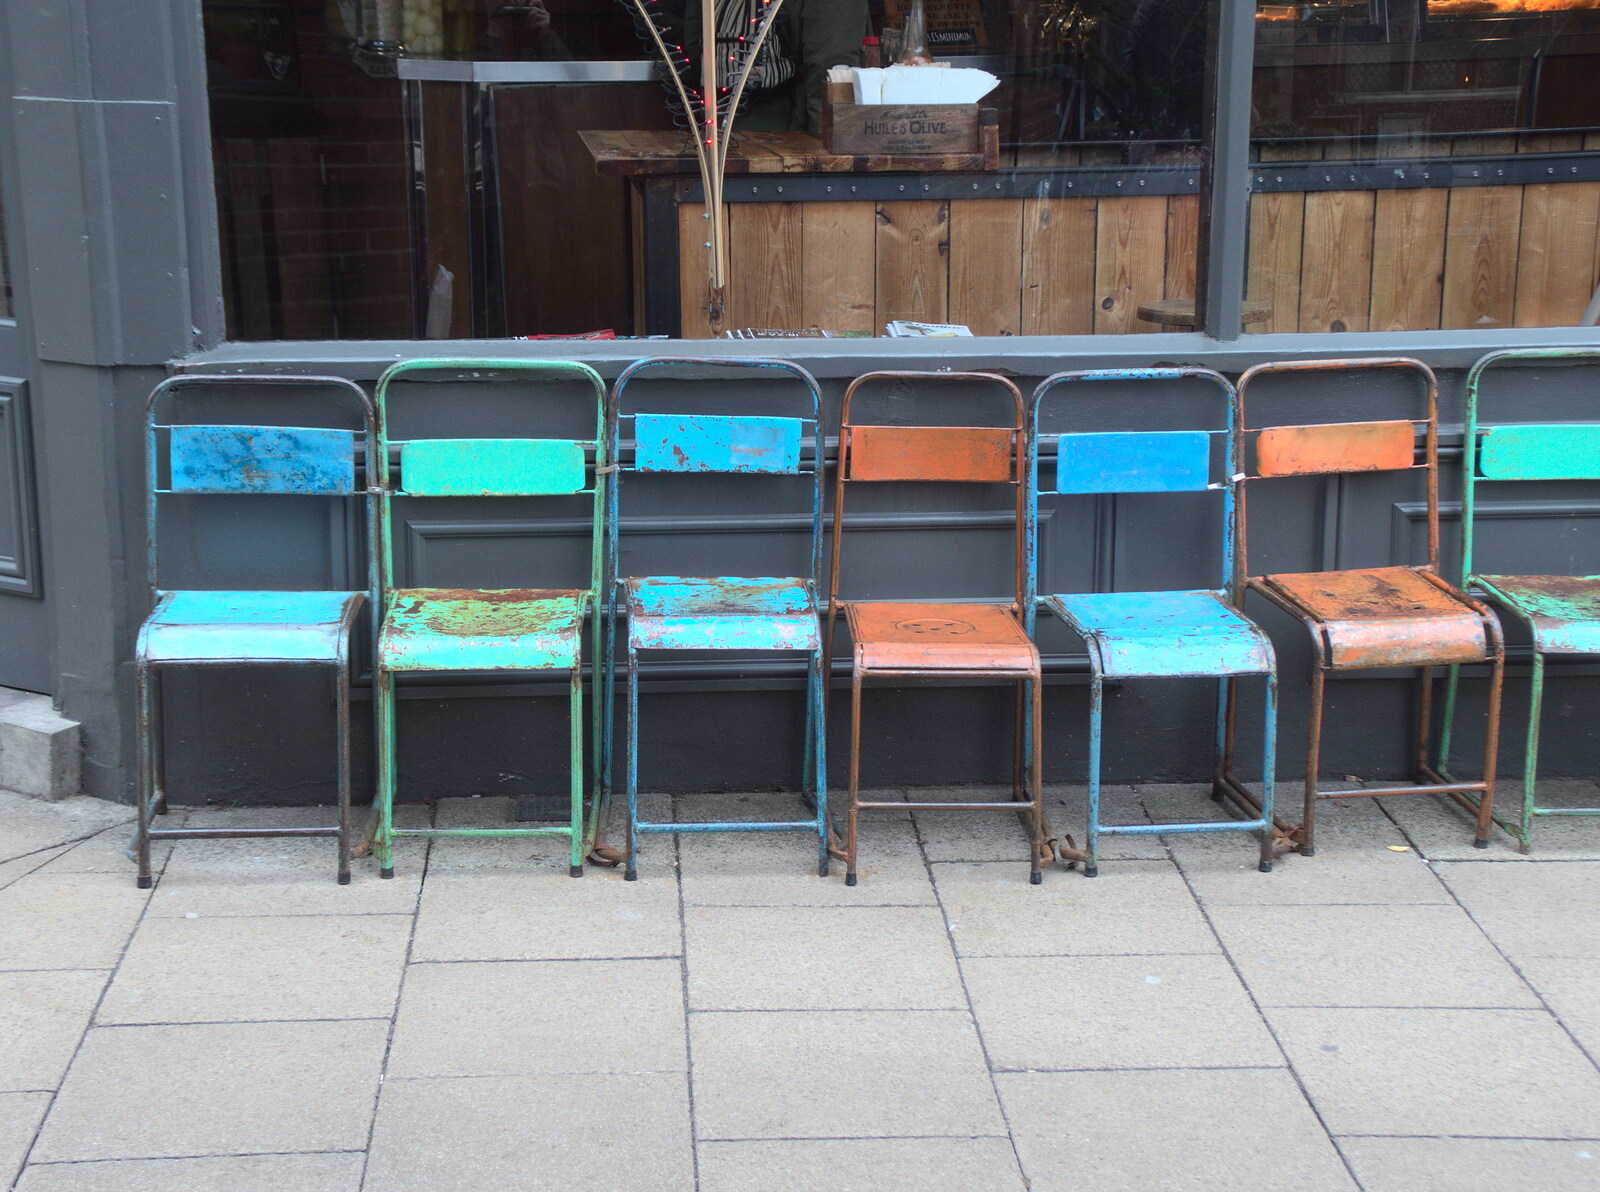 Funky chairs outside the Grosvenor Fish Bar from A Couple of Trips to Norwich, Norfolk - 31st March 2018